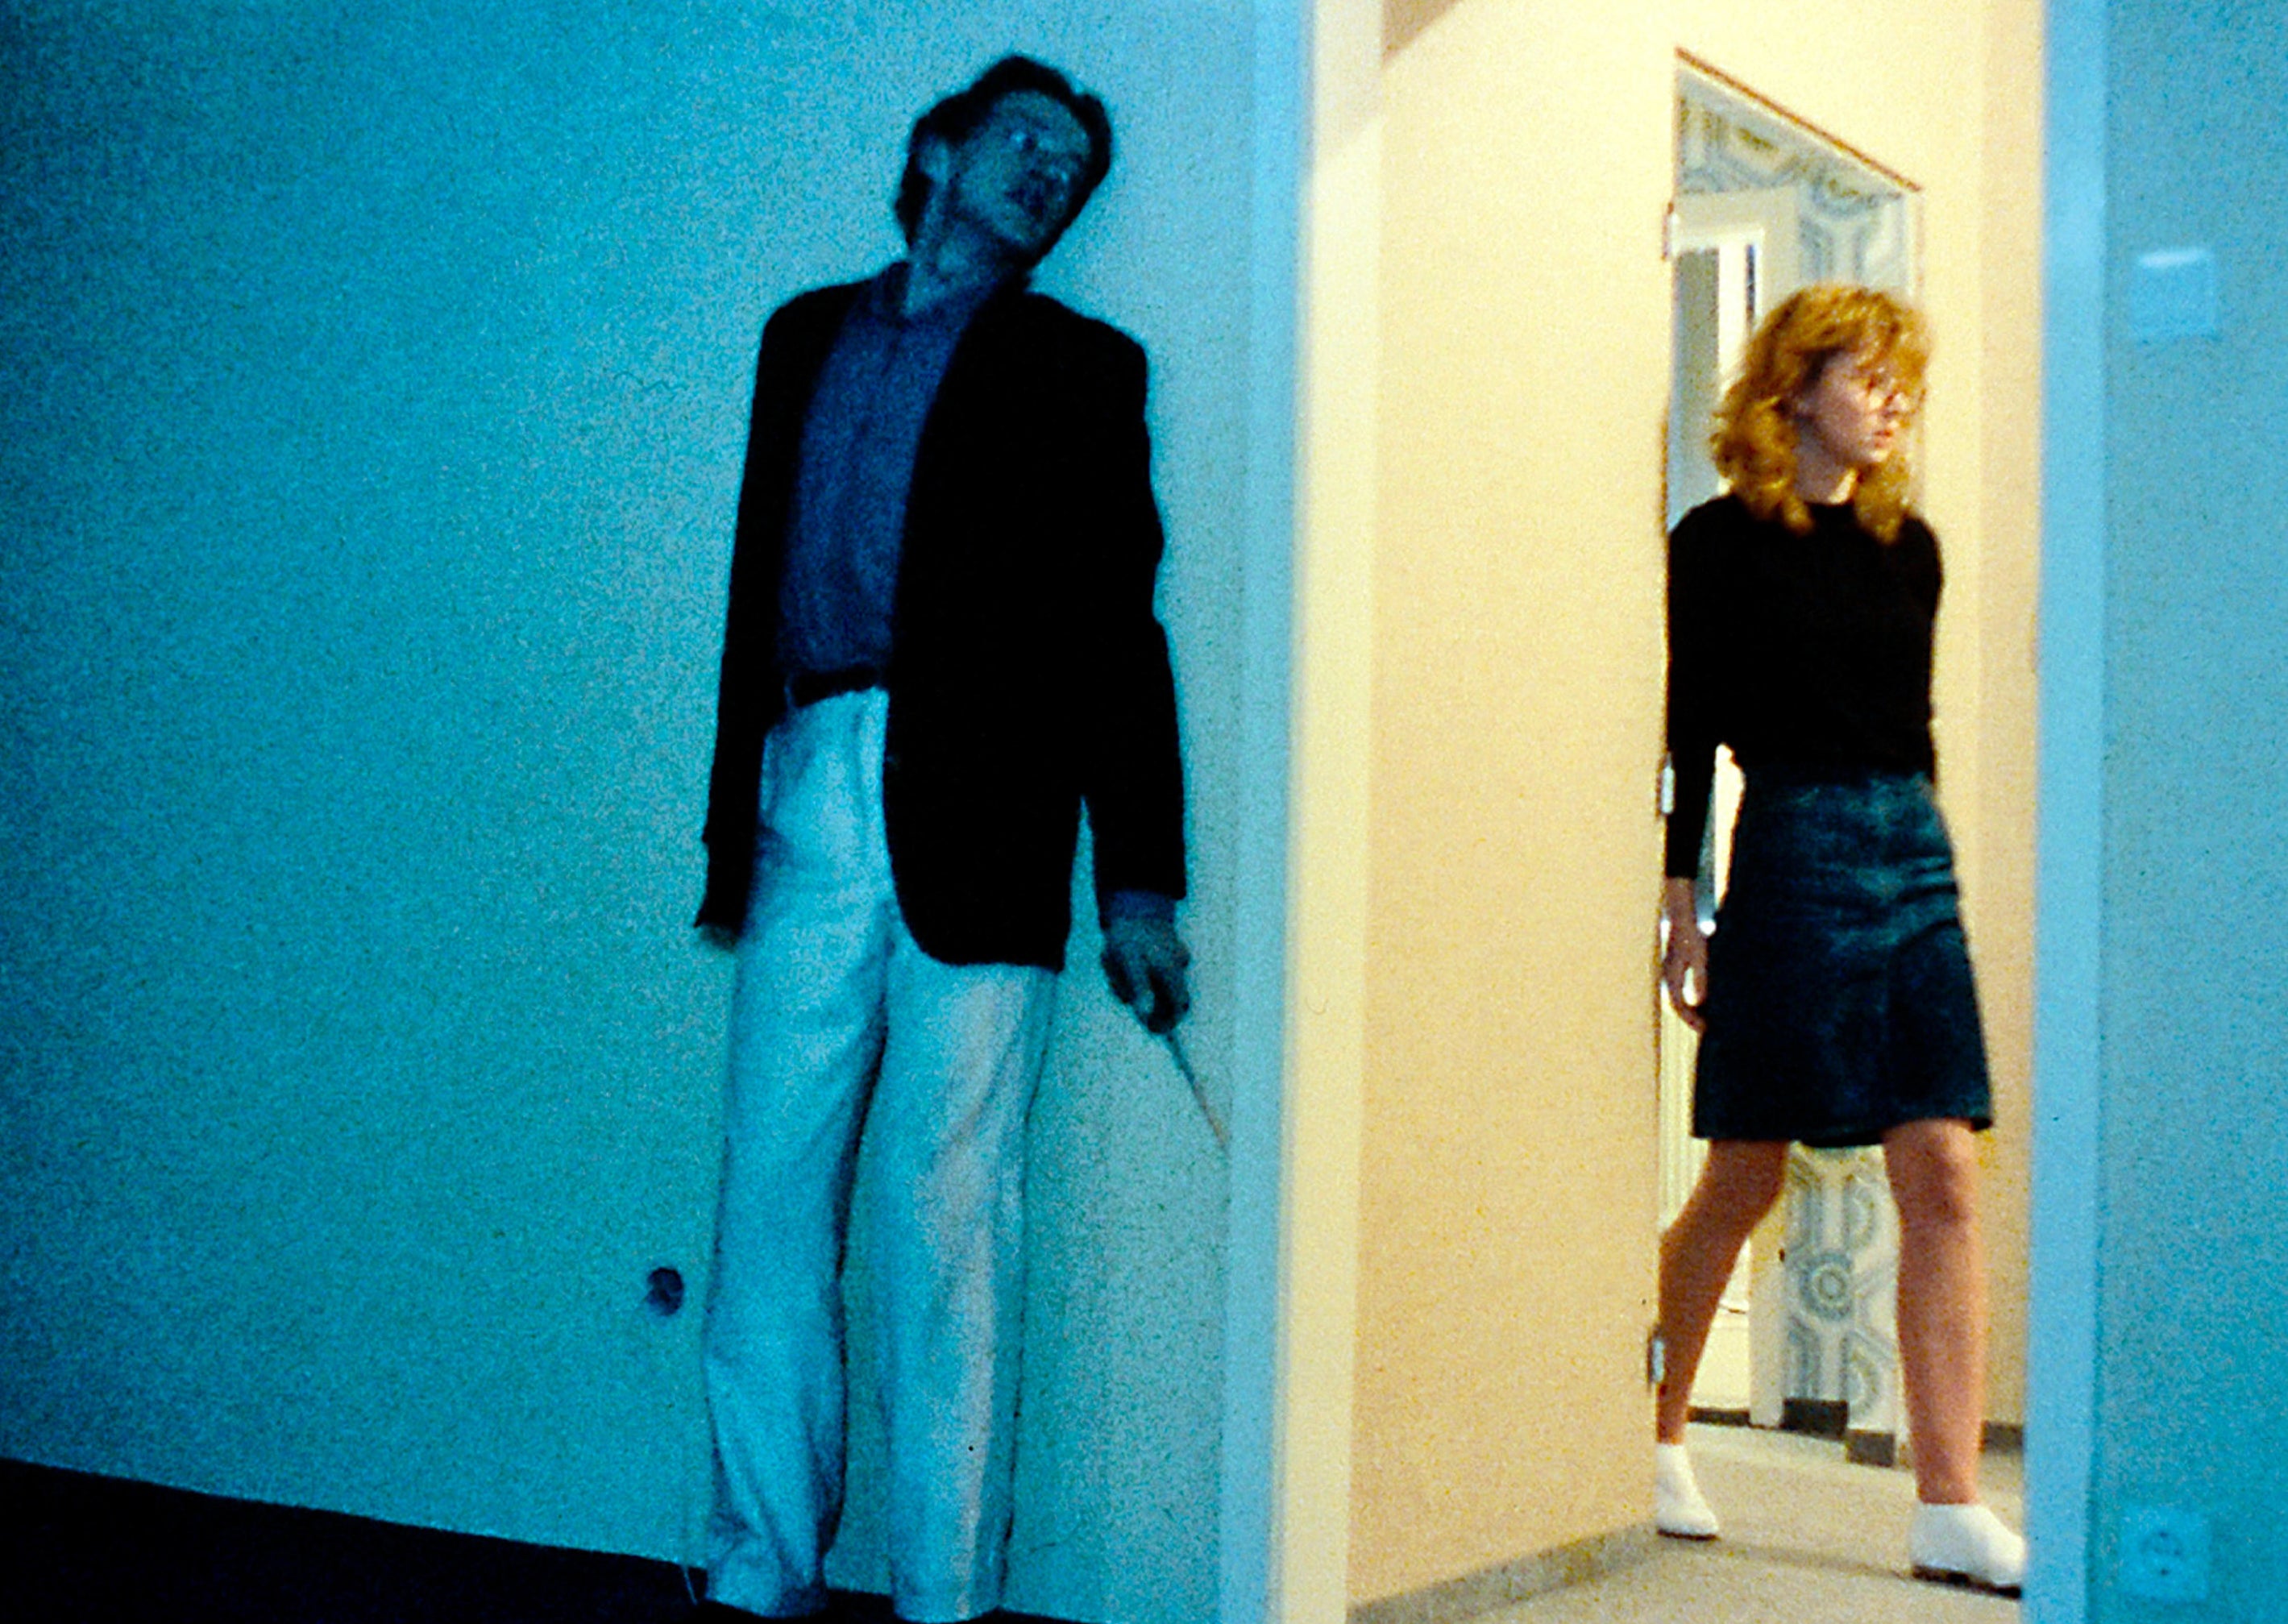 A tall, skinny and panicked man stands behind a wall while a young woman walks past a room